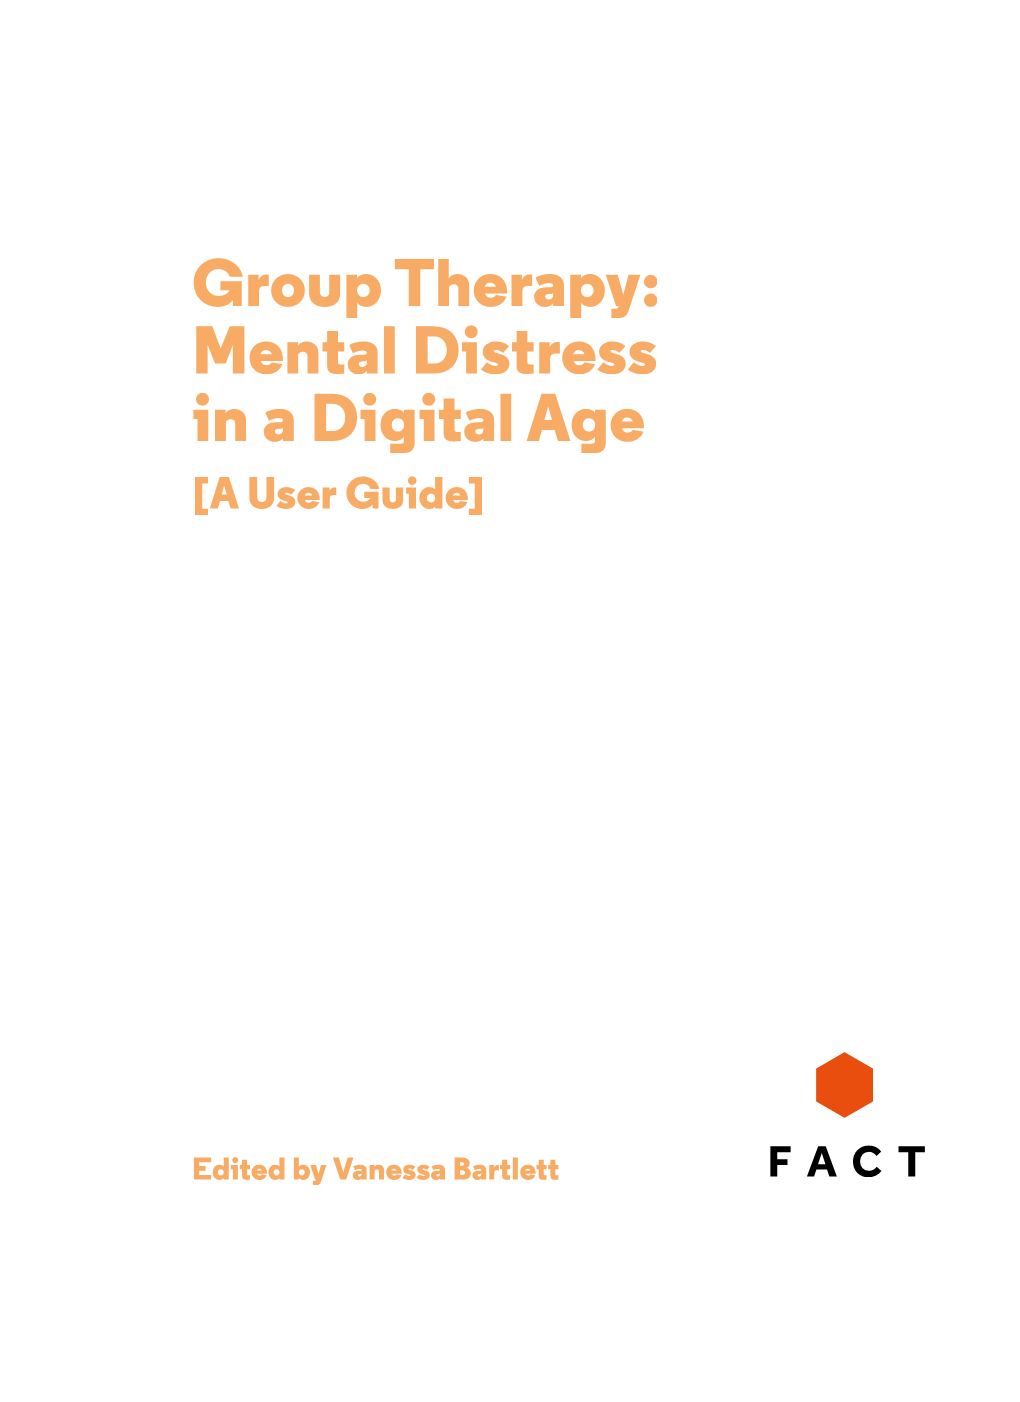 Group Therapy: Mental Distress in a Digital Age [A User Guide]